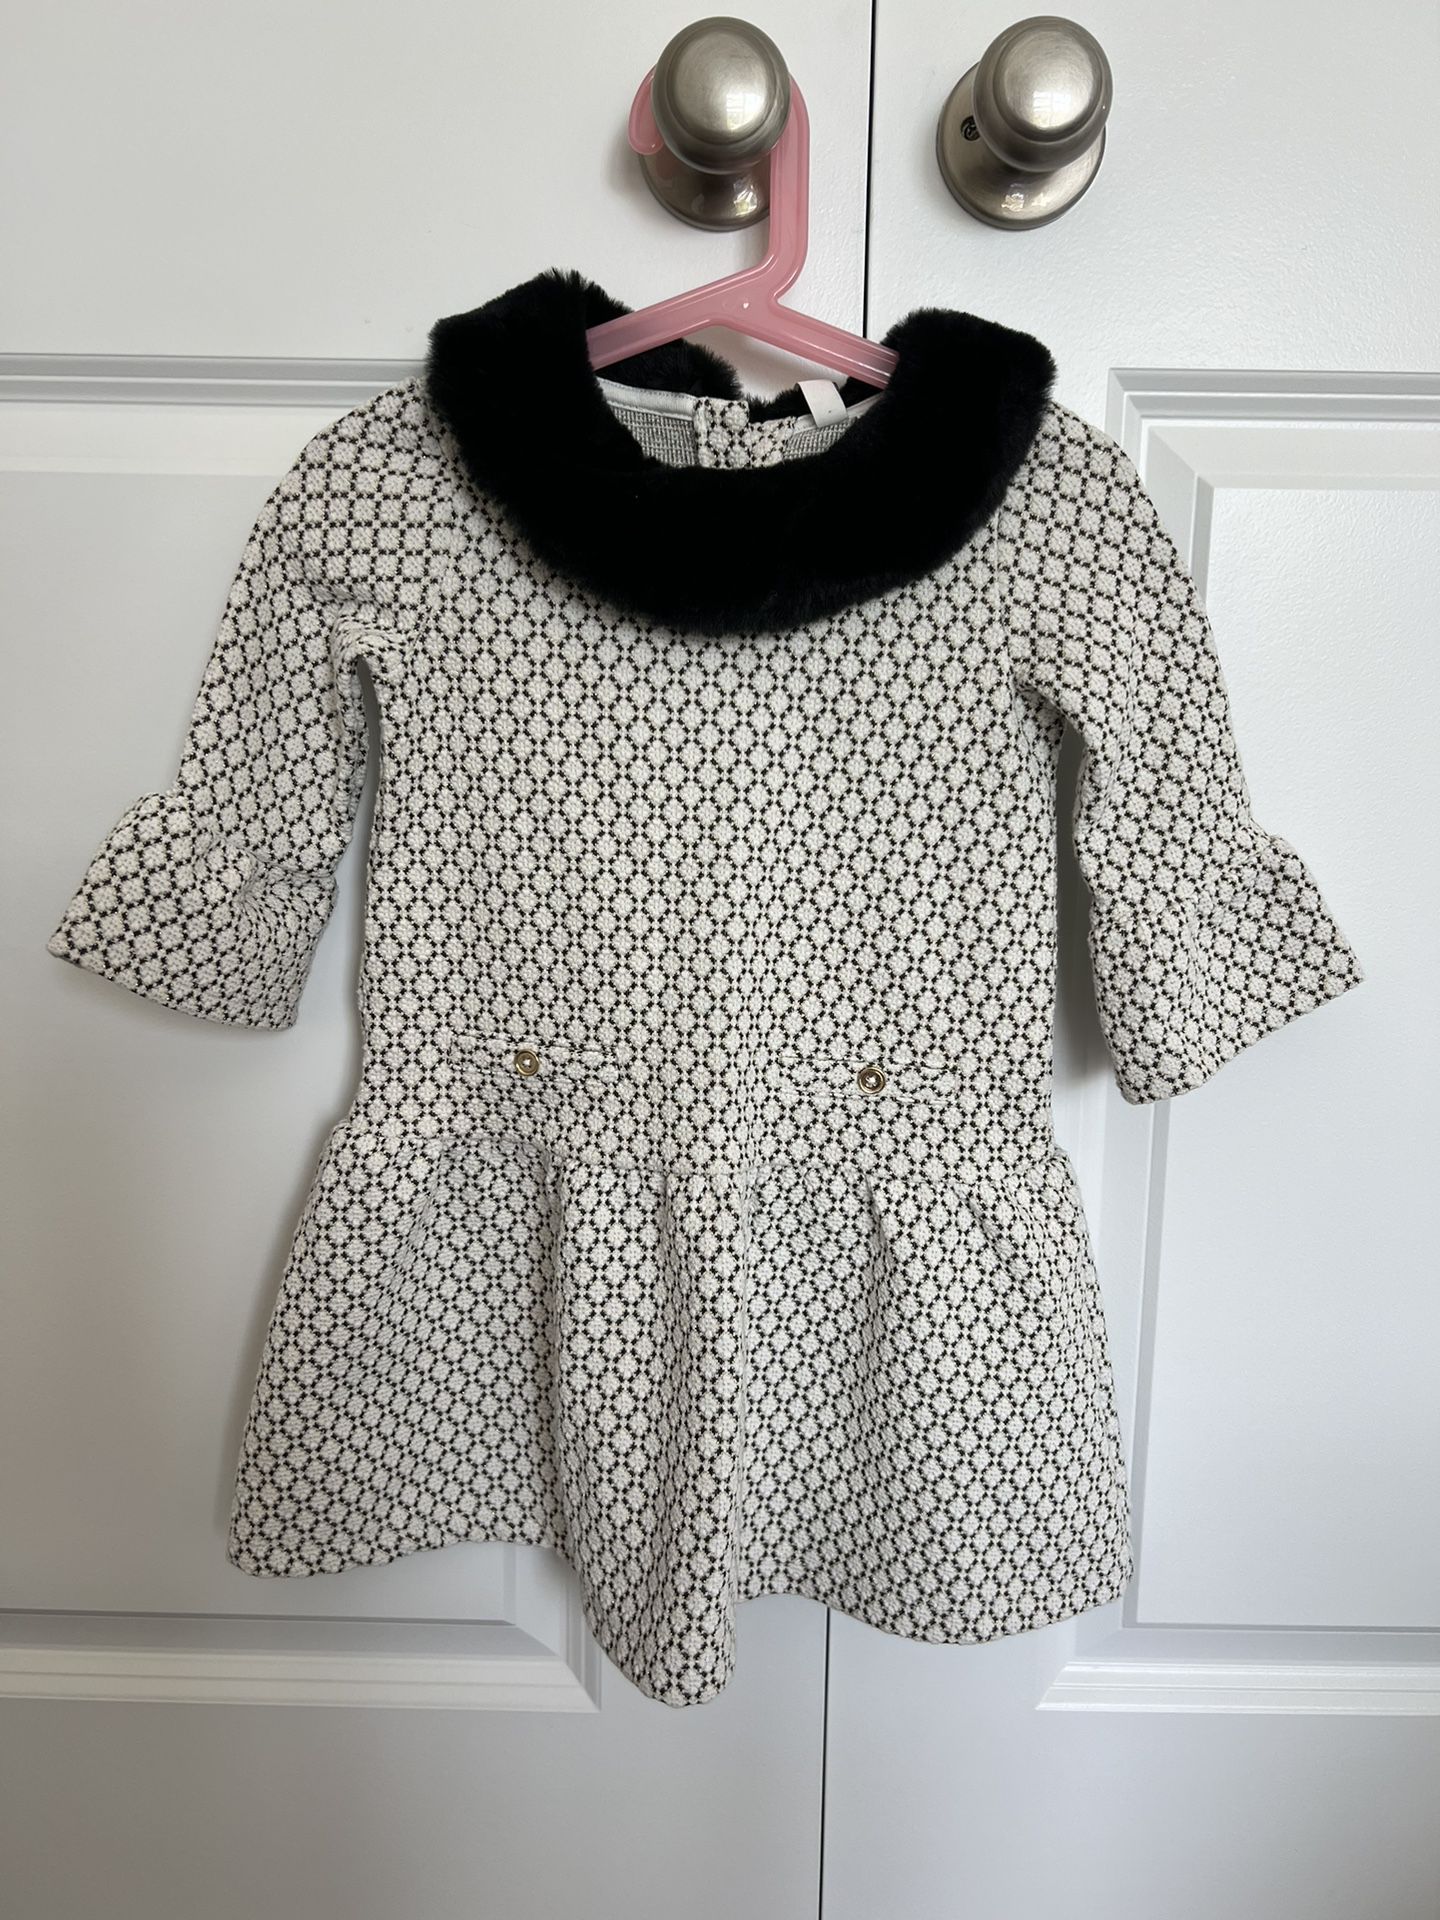 Janie And Jack Toddler Dress-NEW